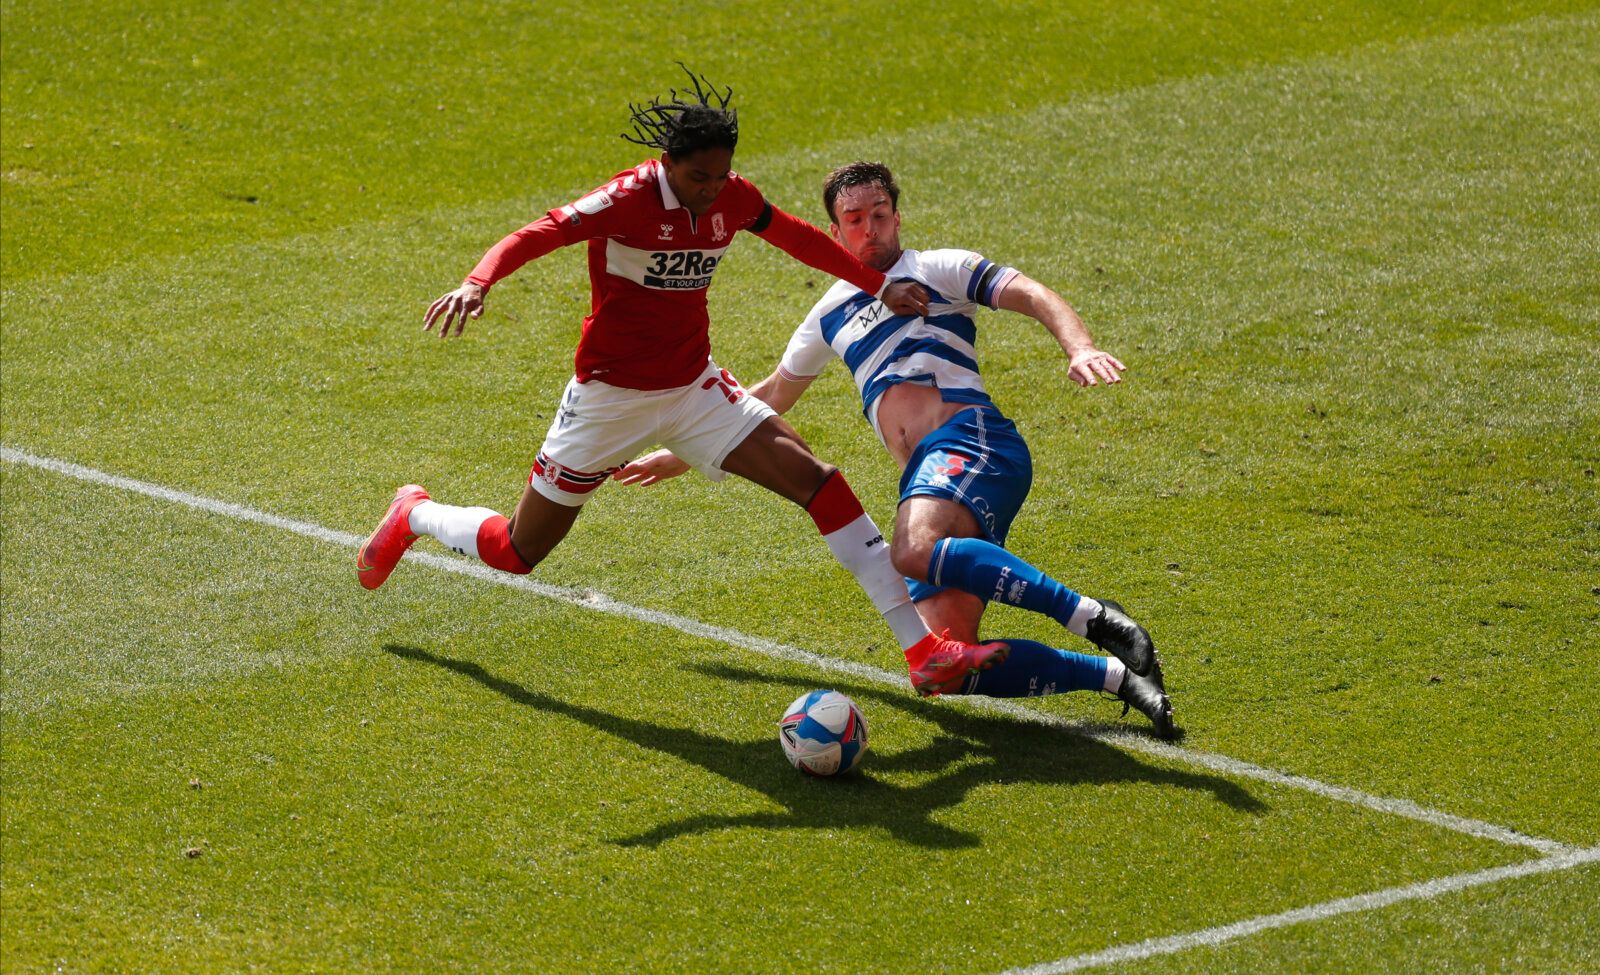 Soccer Football - Championship - Middlesbrough v Queens Park Rangers - Riverside Stadium, Middlesbrough, Britain - April 17, 2021 Queens Park Rangers' Lee Wallace in action with Middlesbrough's Djed Spence Action Images/Lee Smith EDITORIAL USE ONLY. No use with unauthorized audio, video, data, fixture lists, club/league logos or 'live' services. Online in-match use limited to 75 images, no video emulation. No use in betting, games or single club /league/player publications.  Please contact your 